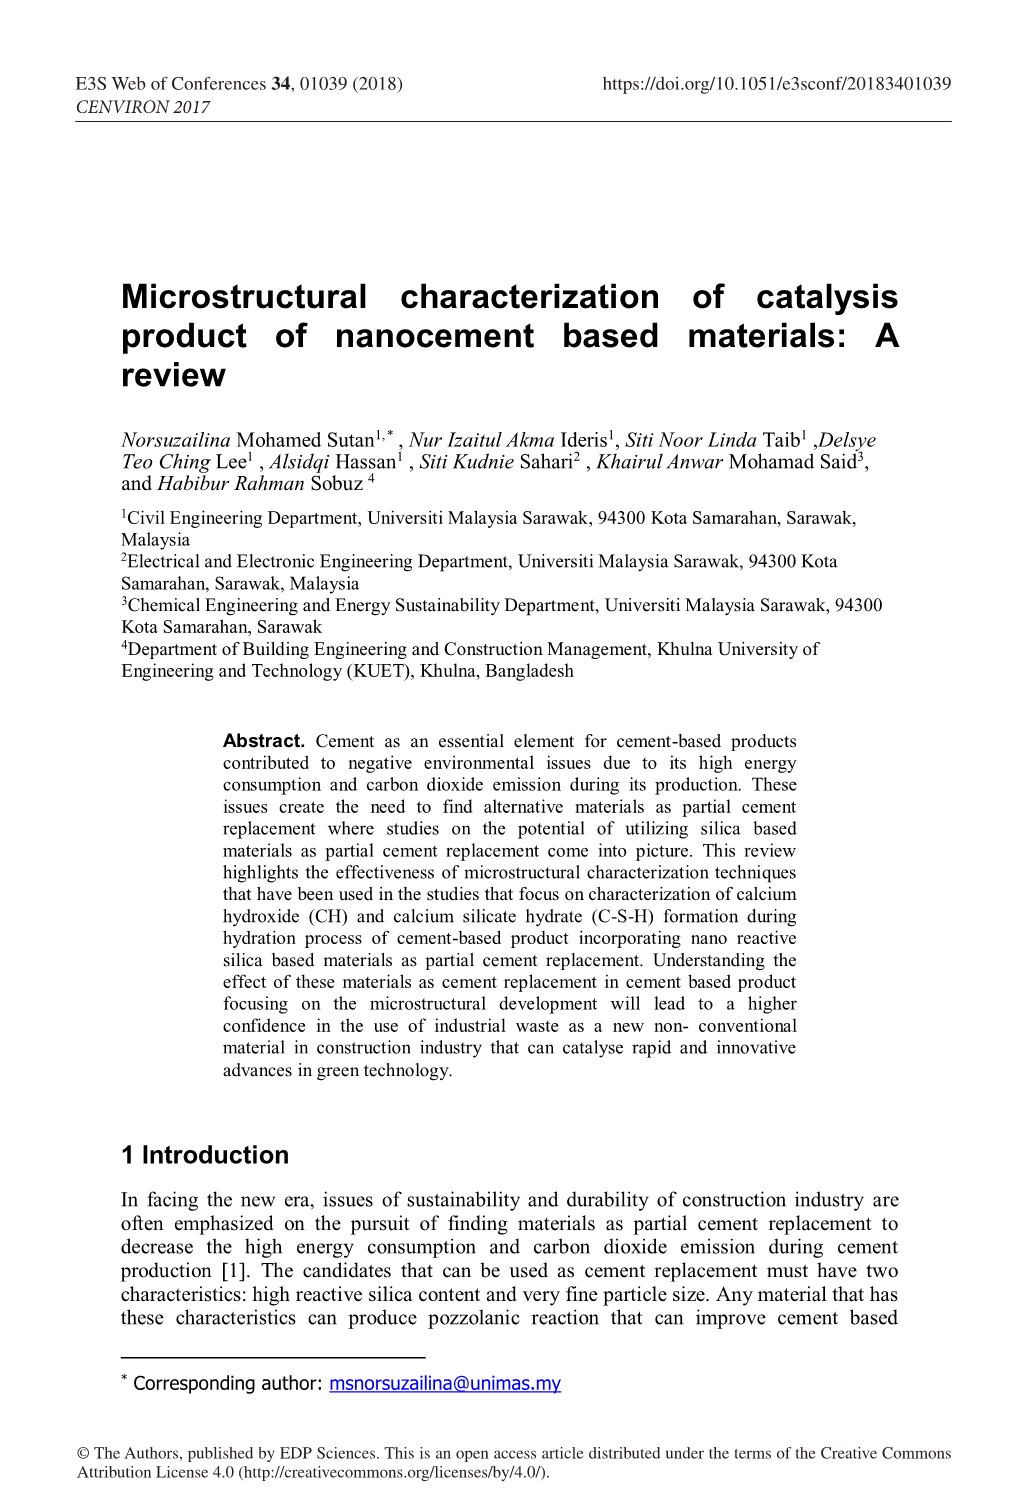 Microstructural Characterization of Catalysis Product of Nanocement Based Materials: a Review